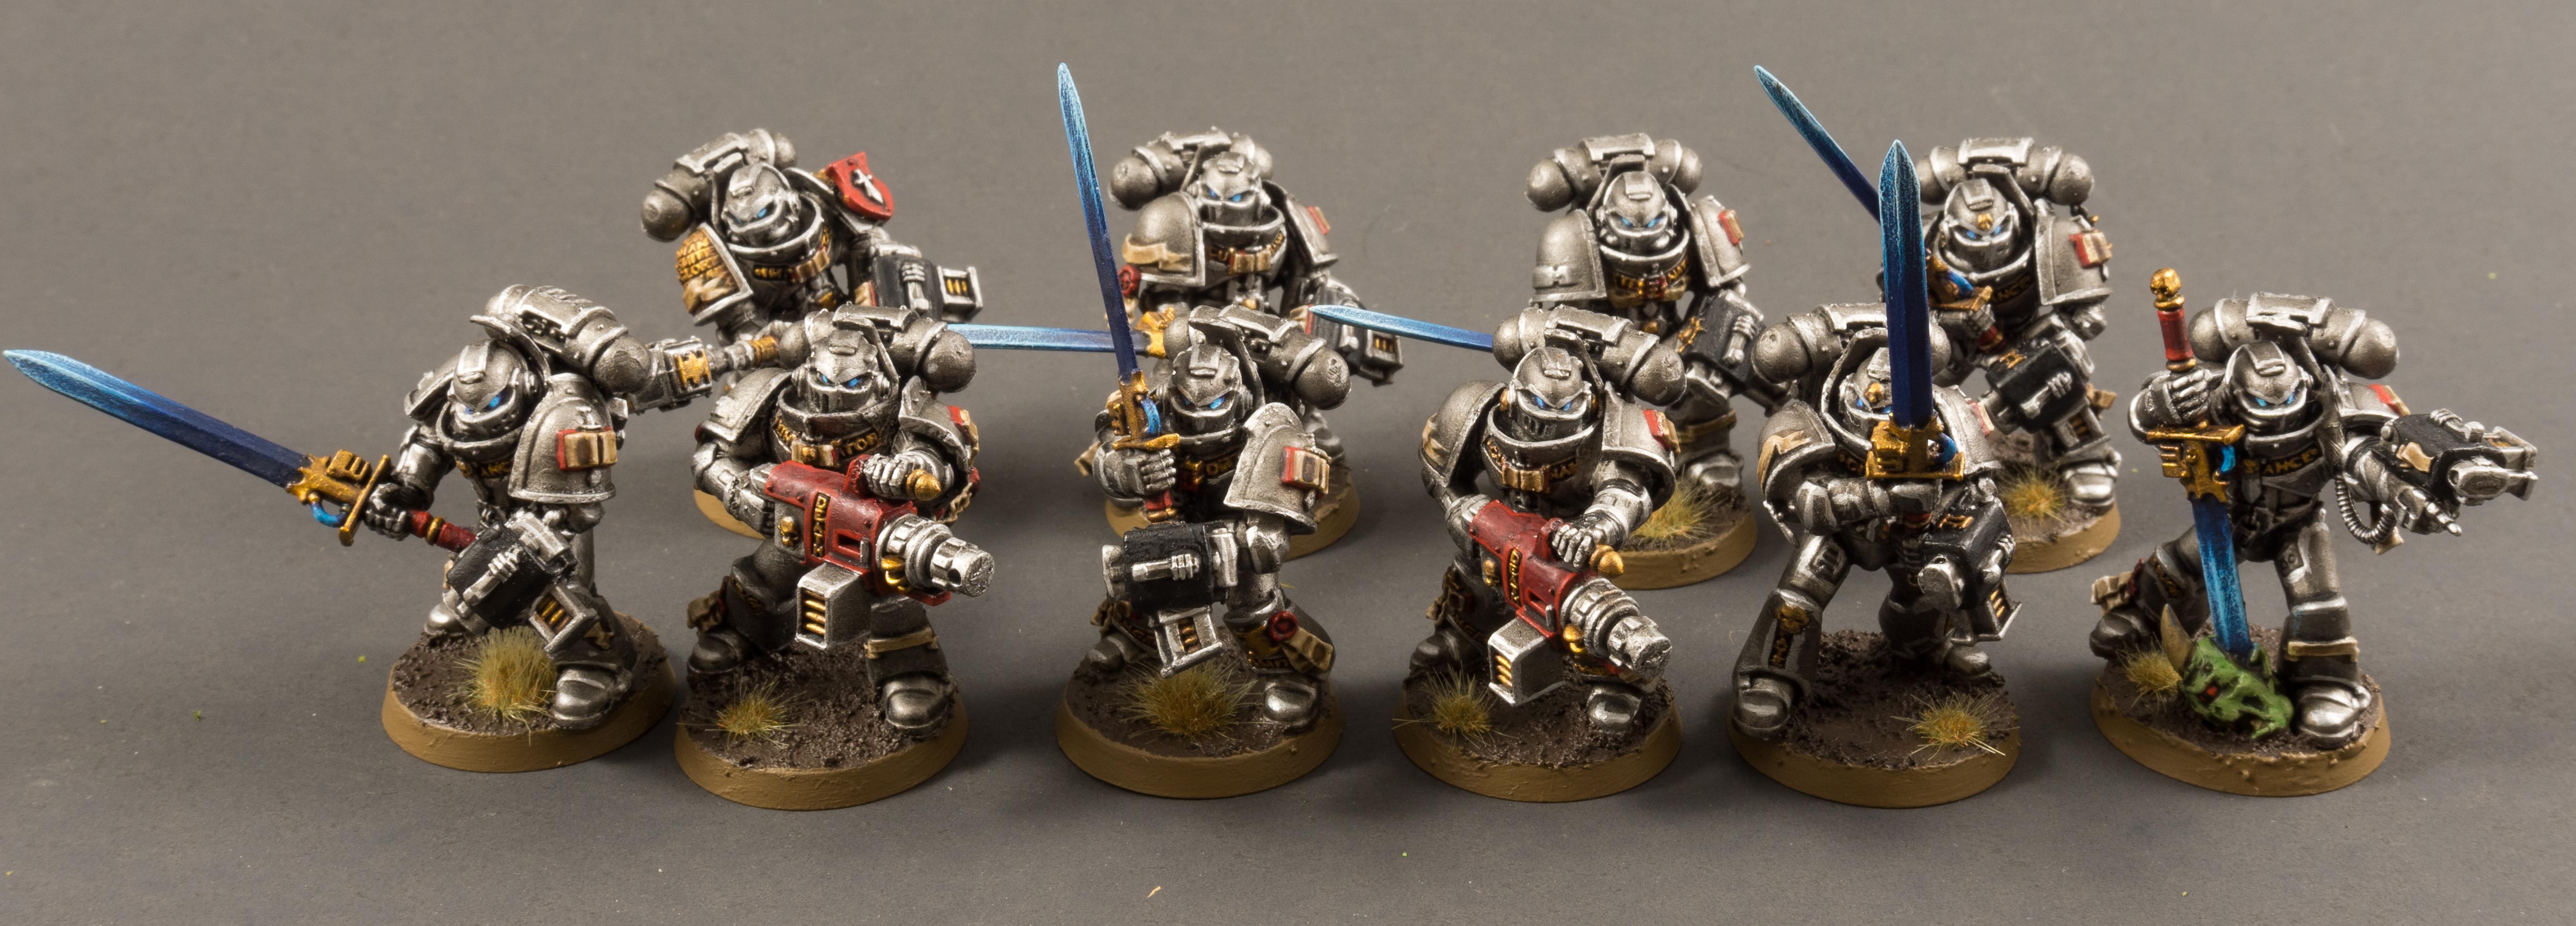 Astartes, Grey Knights, Power Sword, Space Marines, Storm Bolter